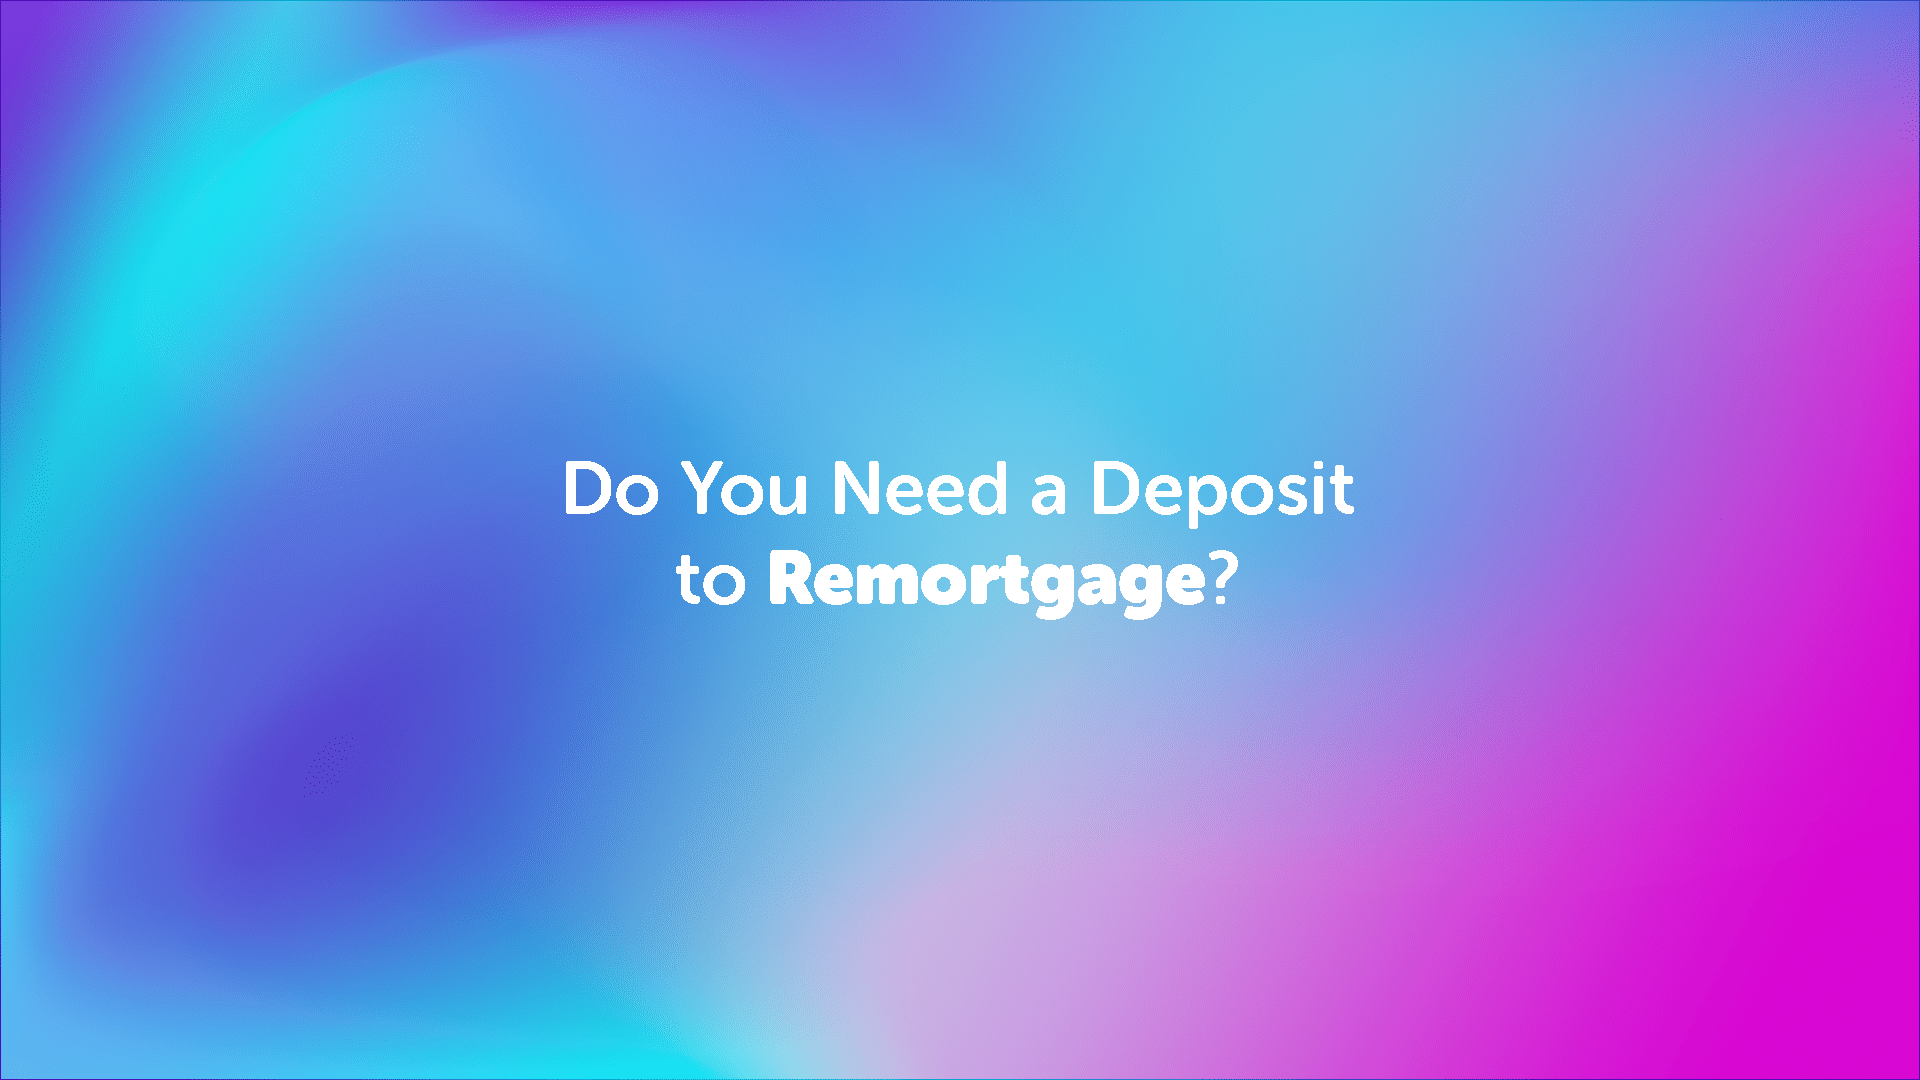 Do You Need a Deposit to Remortgage in Scunthorpe?